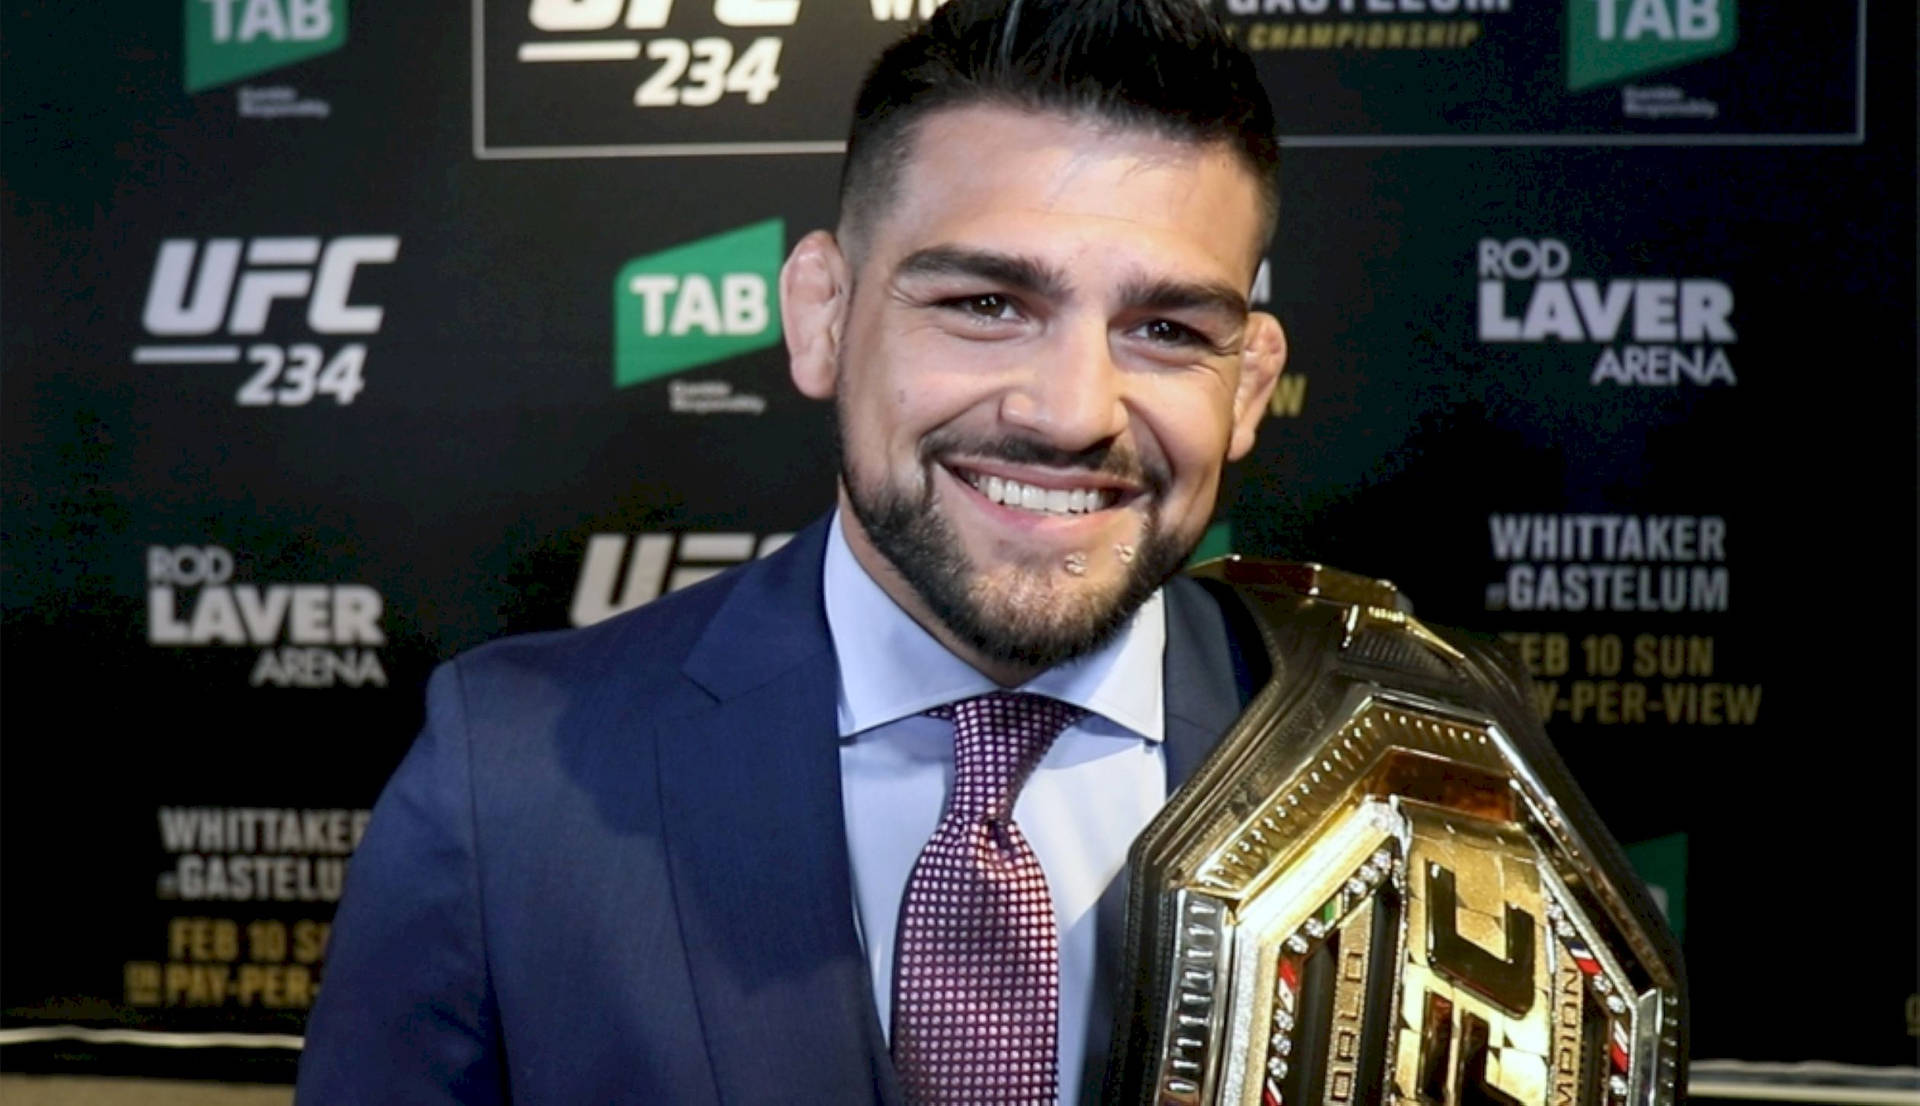 "kelvin Gastelum Showing His Prowess In The Octagon." Wallpaper